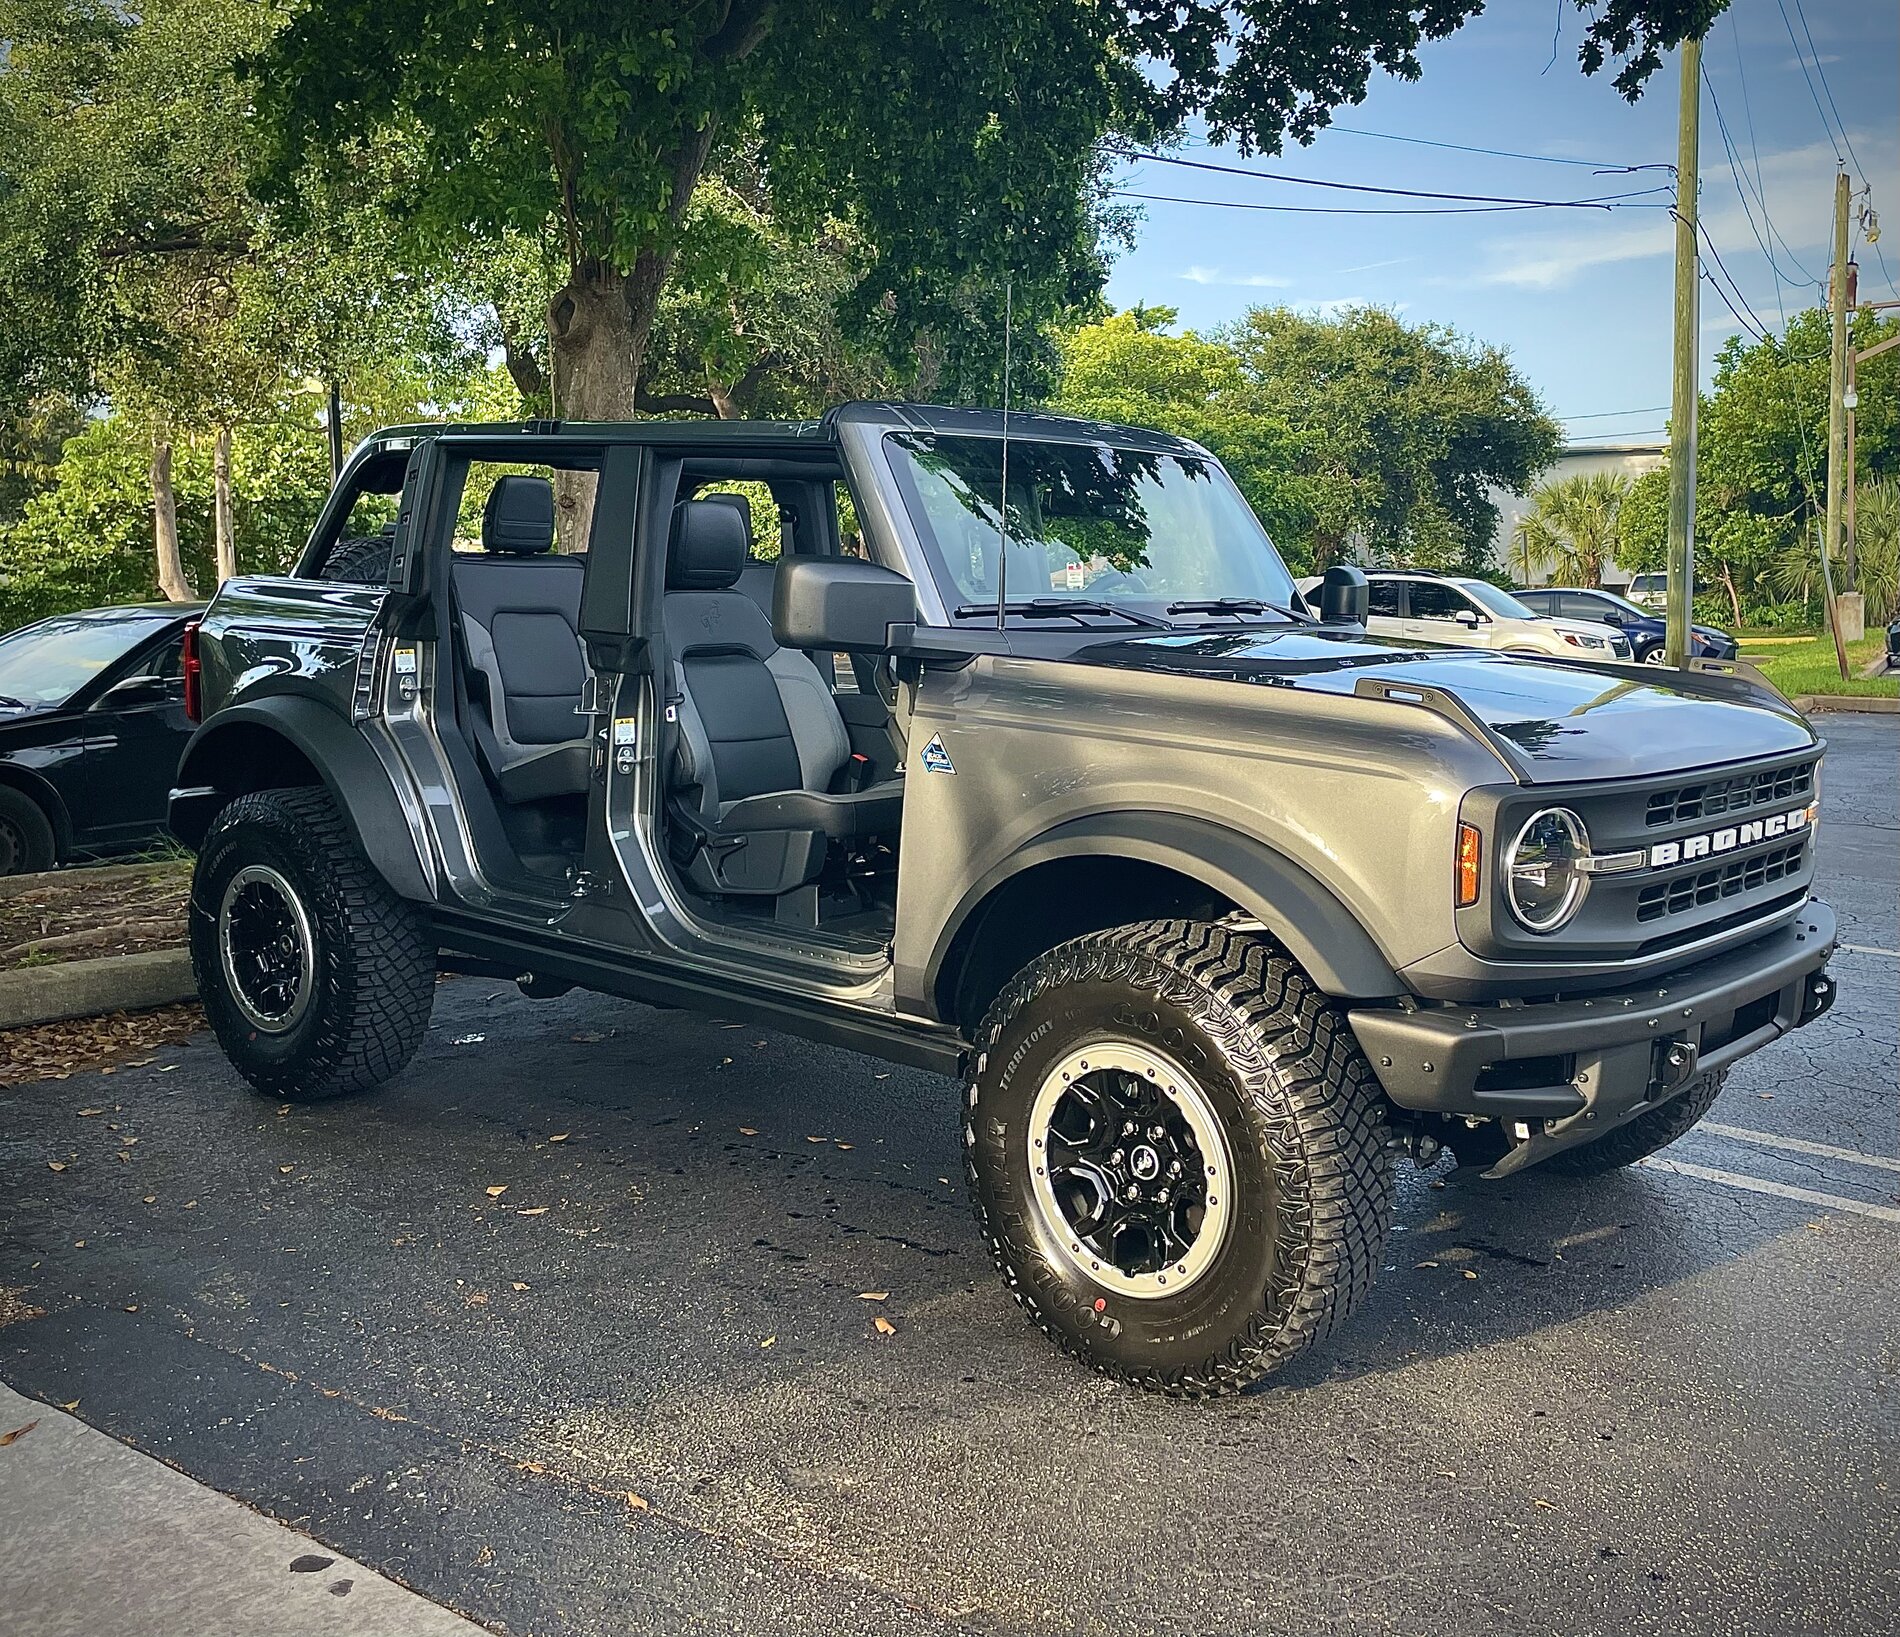 Ford Bronco Black Diamond Sasquatch delivered in S. Florida - Order/Delivery Timeline & First Impressions 41C172E2-D063-44FB-BE94-D25C8619FA18